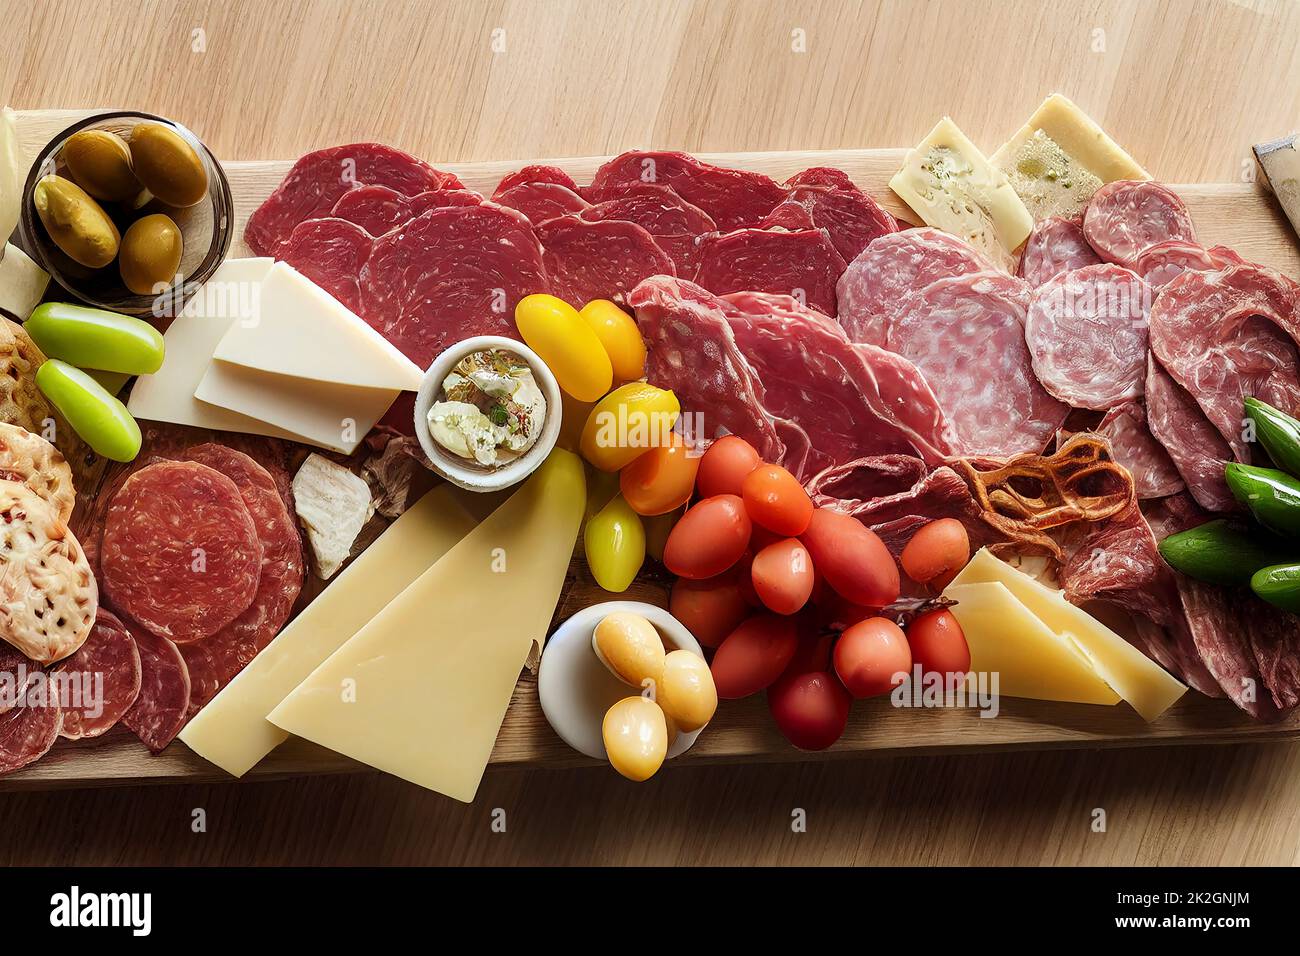 Food charcuterie board with cured meats prosciutto, salami, hard and soft cheeses, crackers and pickled vegetables, food photography and illustration Stock Photo